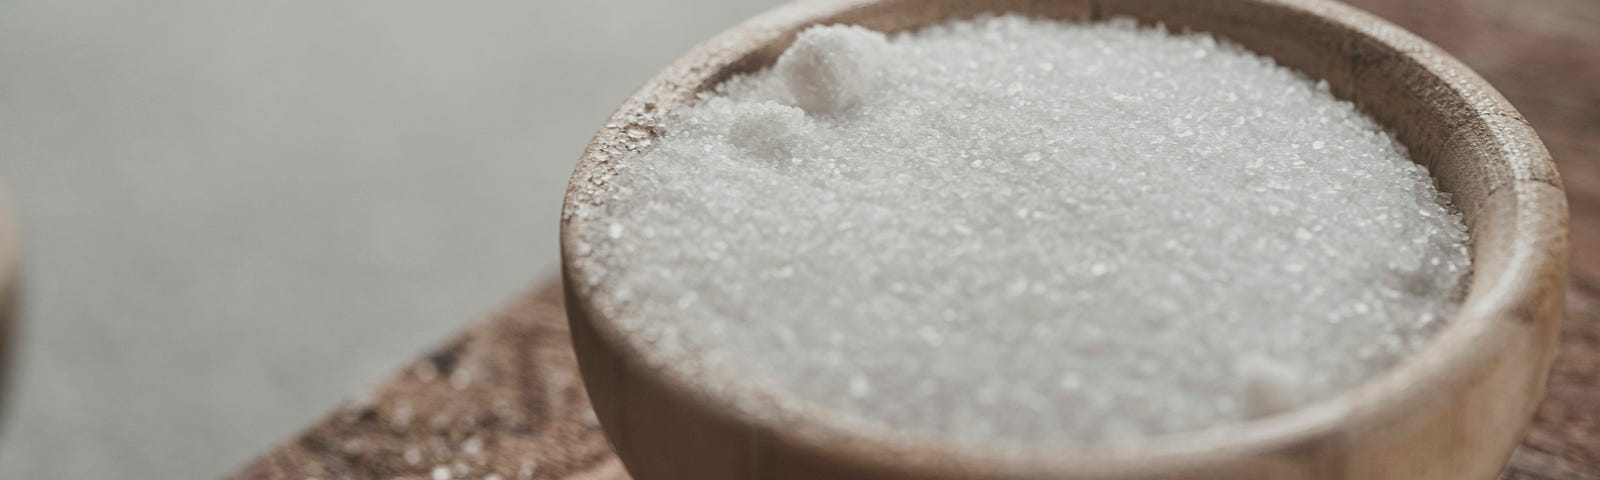 White sugar in a small pale wooden bowl, on a grainy wood table top.